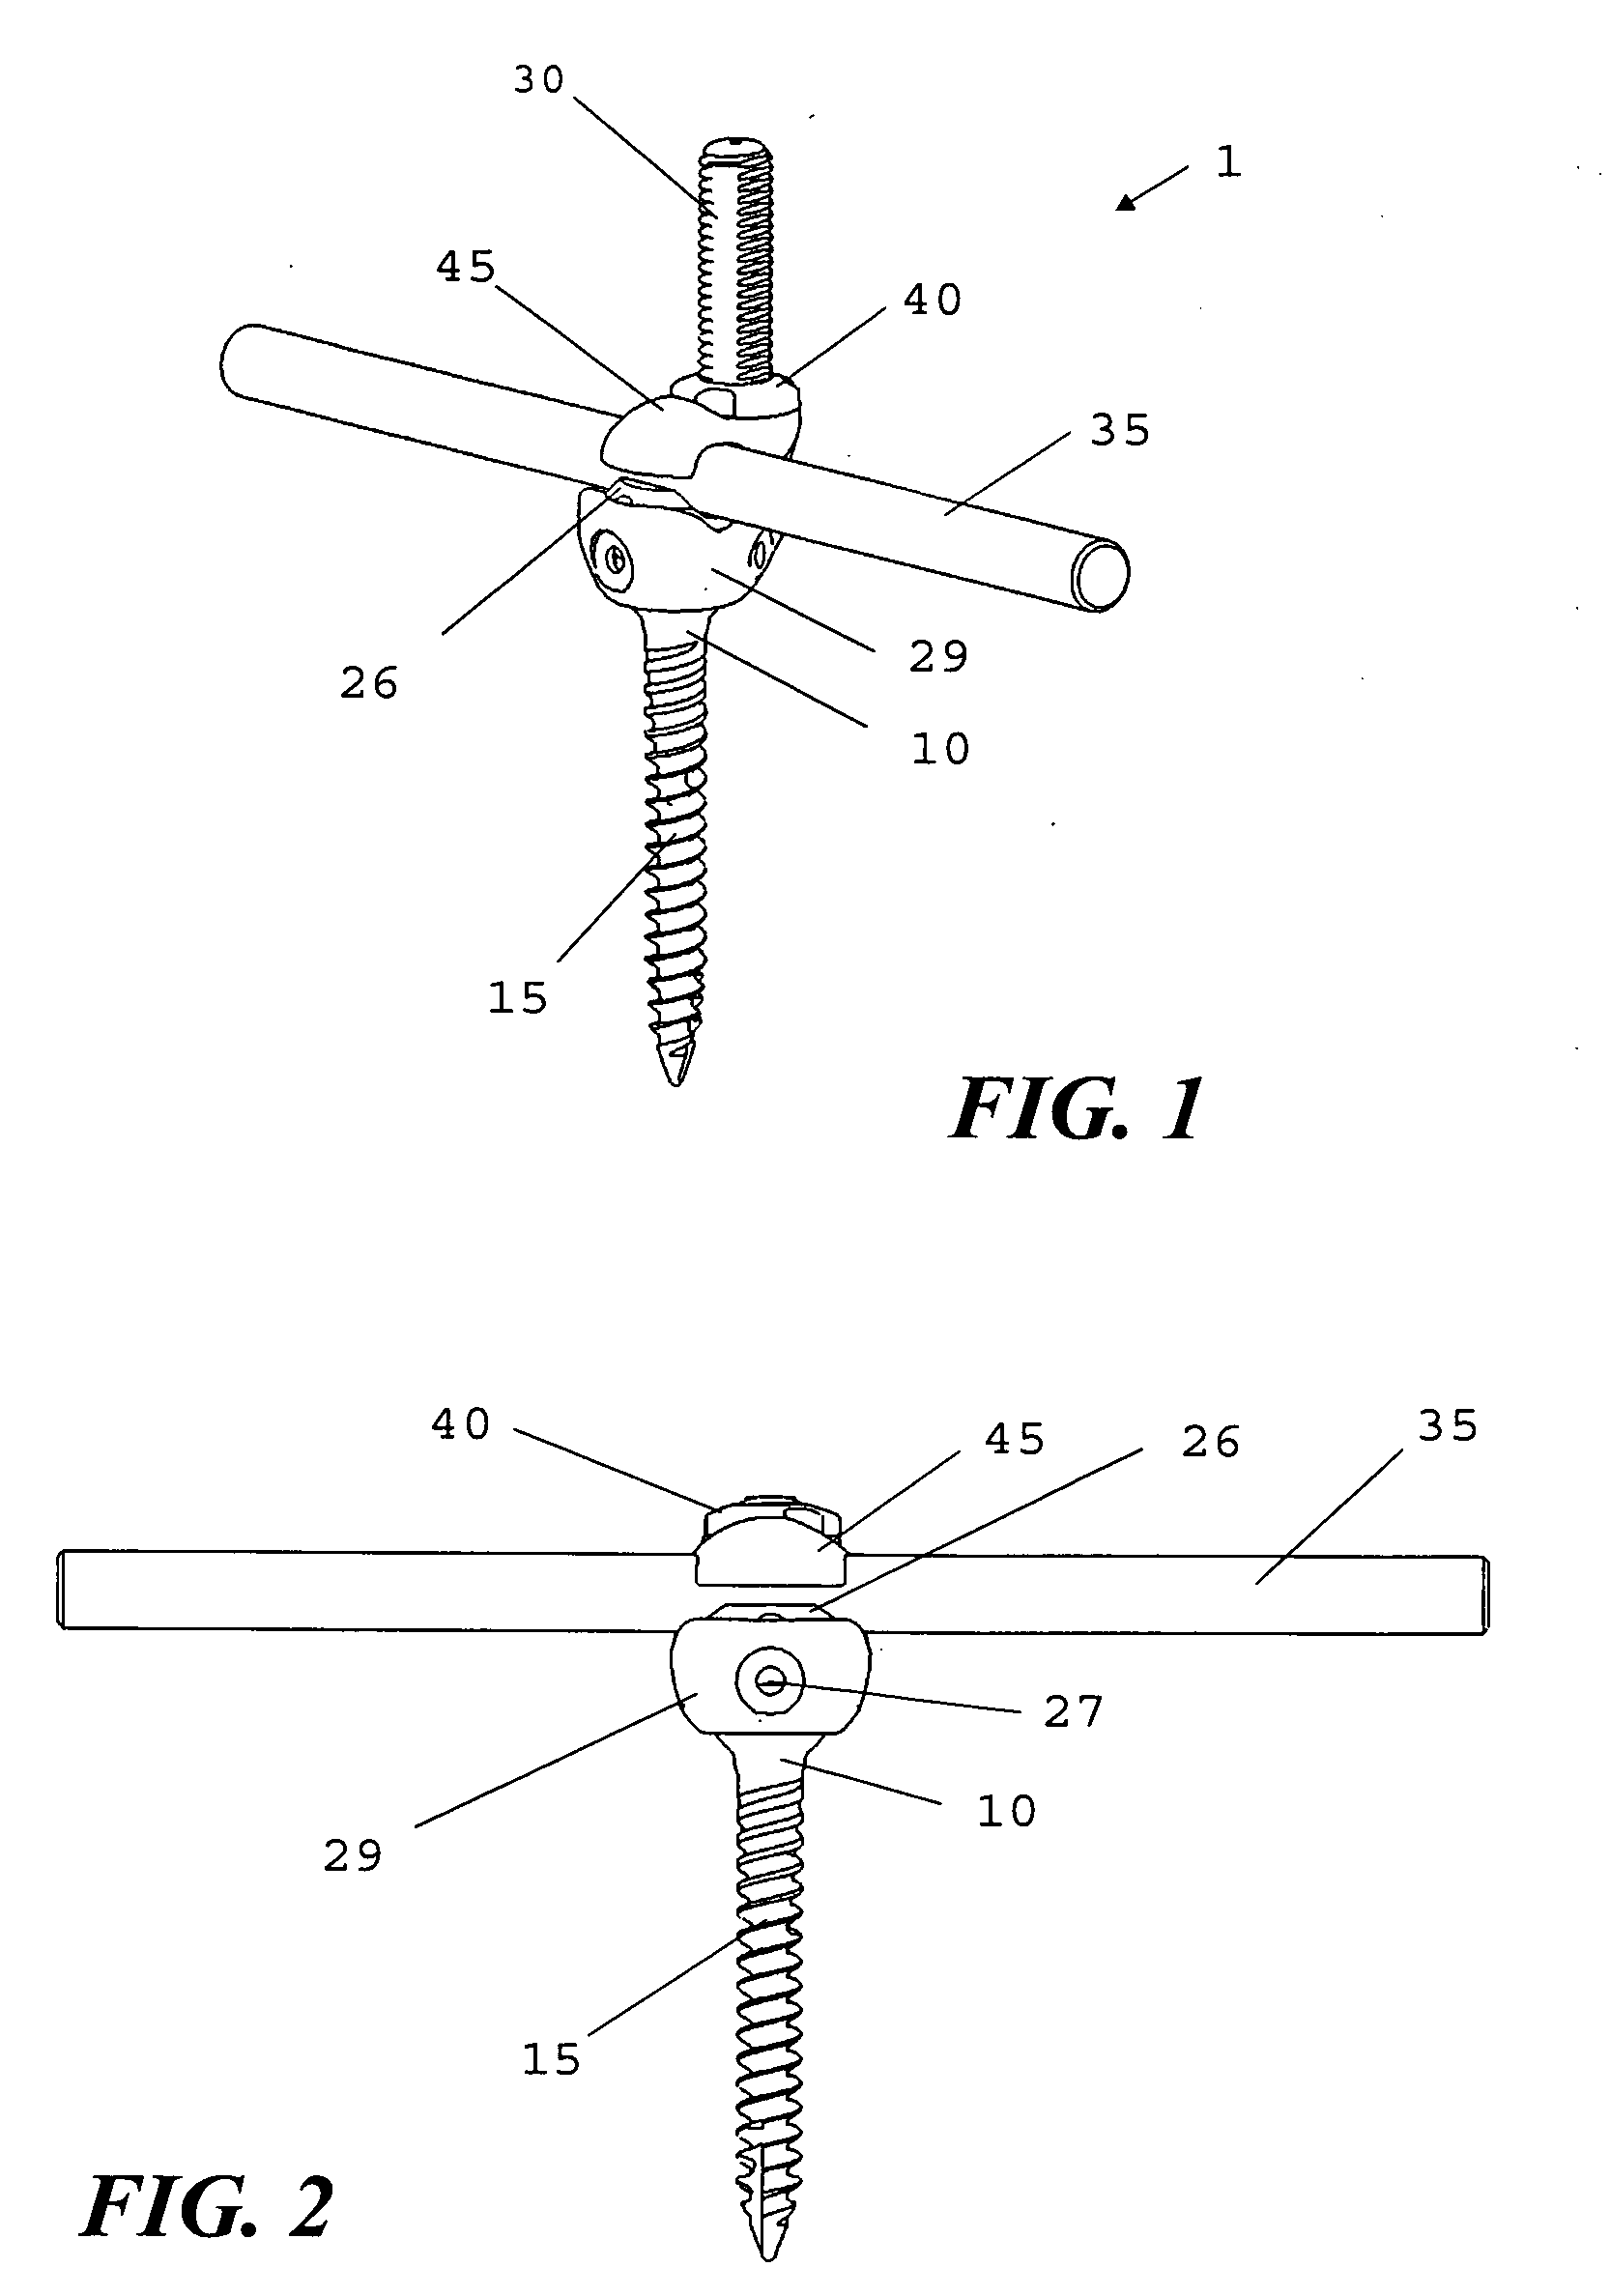 Bone anchoring member with clamp mechanism